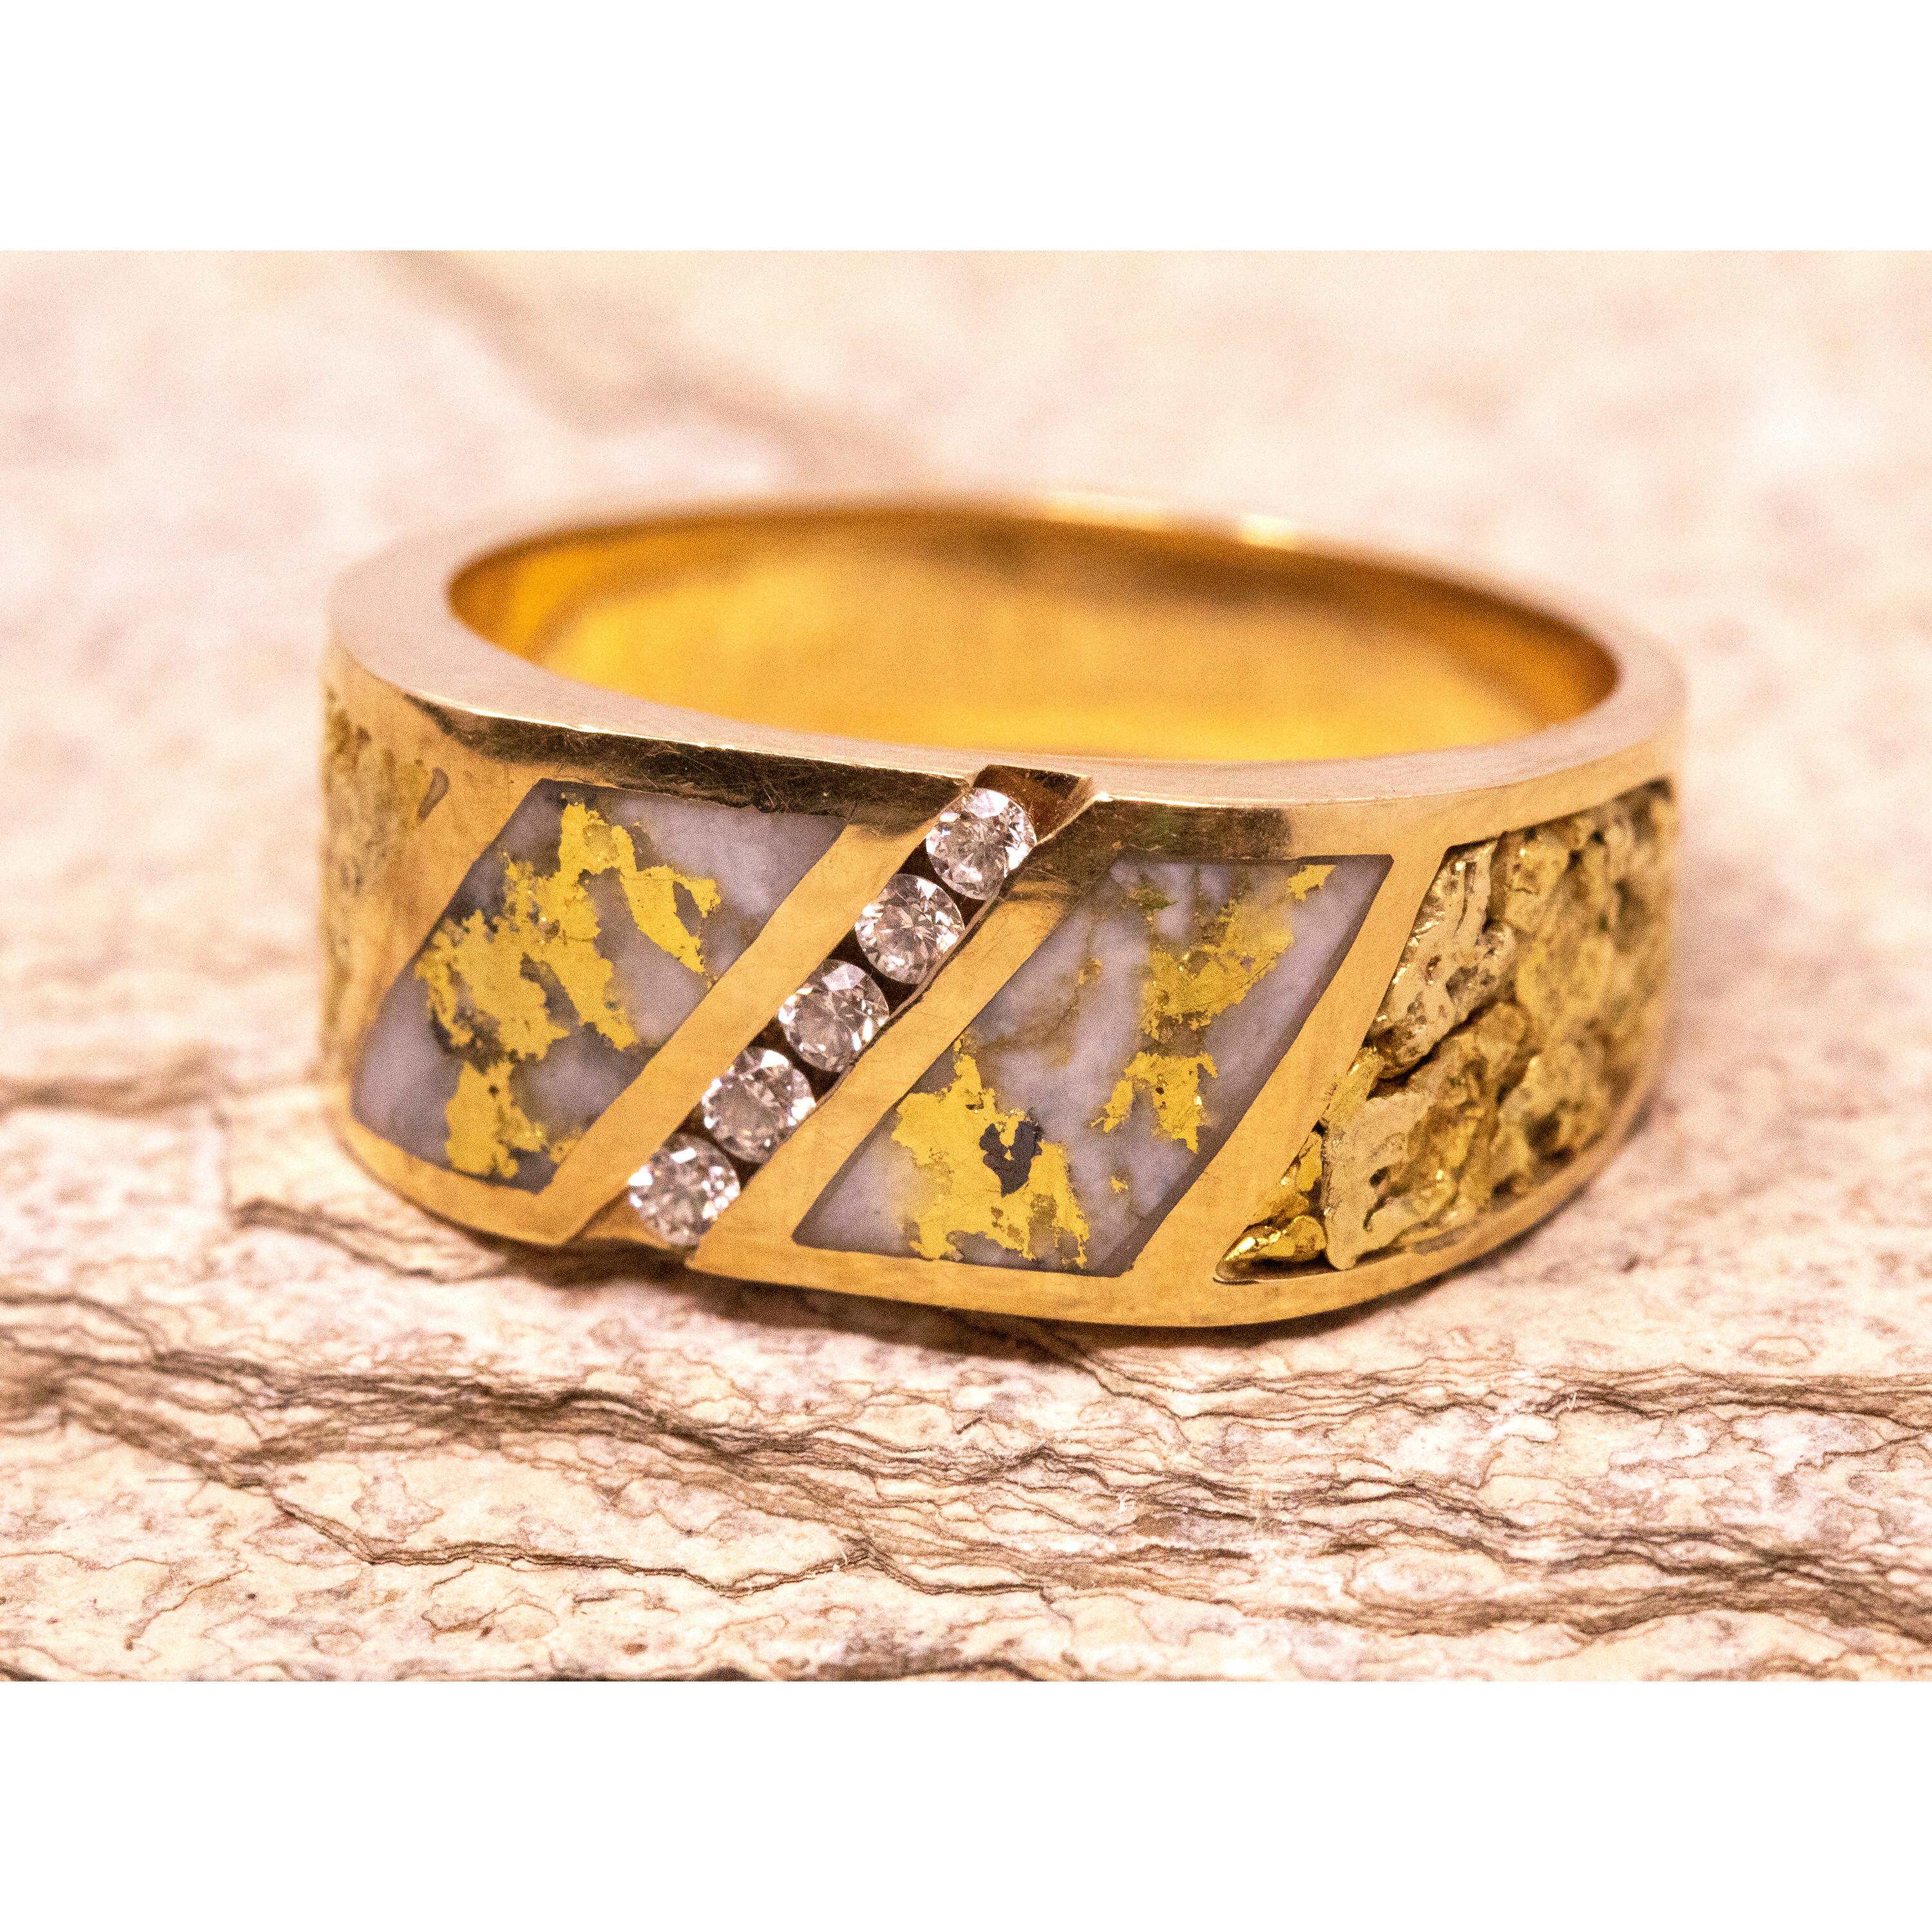 The perfect balance of elegant and understated, this natural gold bearing quartz and gold nugget men's ring makes a gorgeous statement without too much noise. The classic shape and styling are a perfect foil to the unusual and masculine material